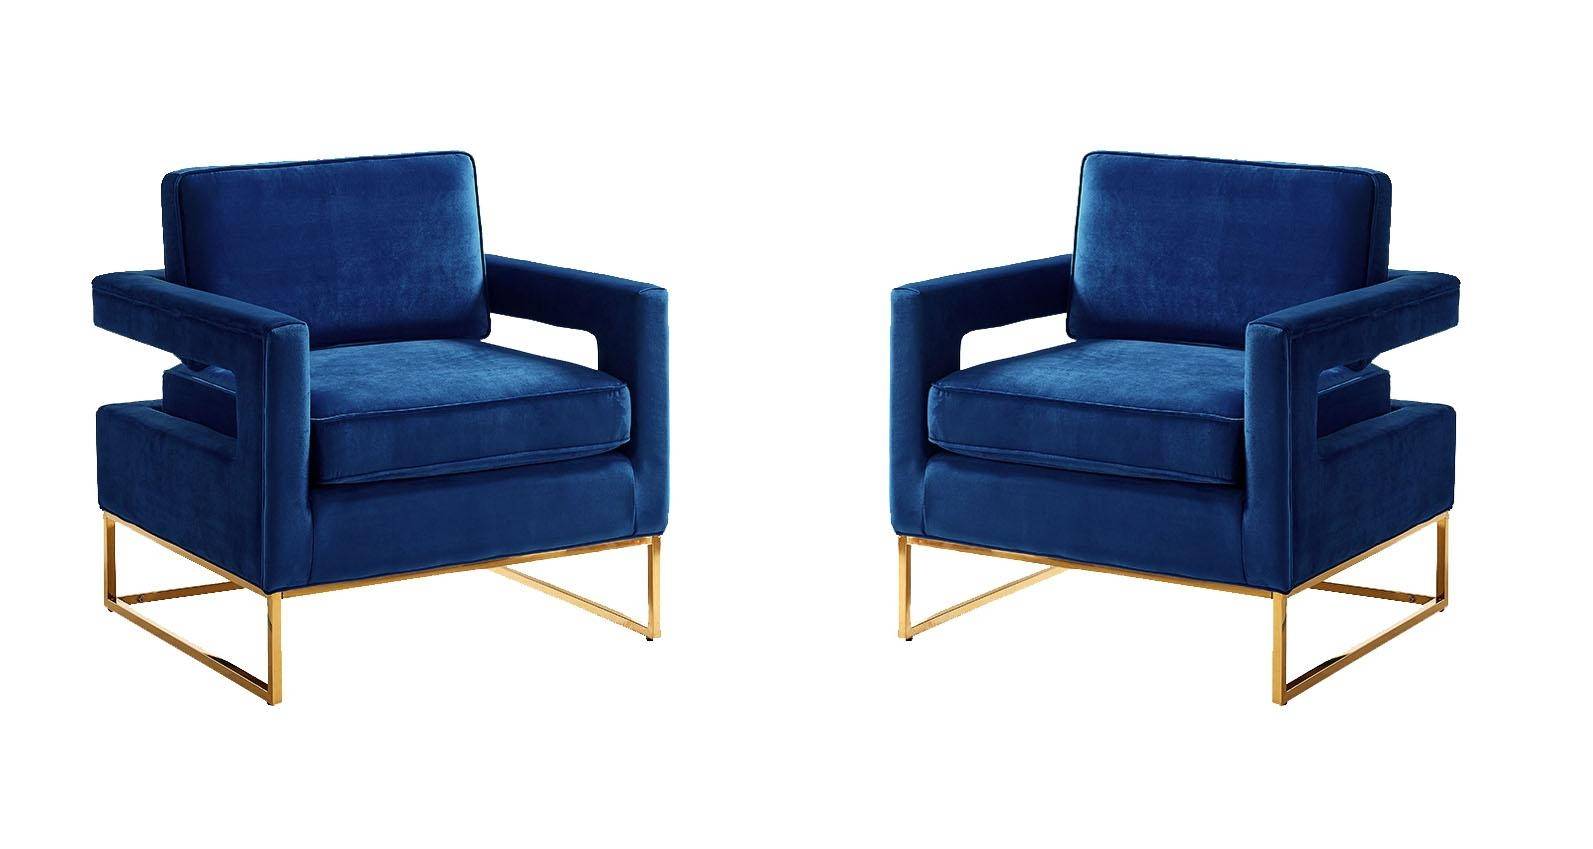 Buy Meridian Noah 511 Accent Chair 2 Pcs in Gold, Navy